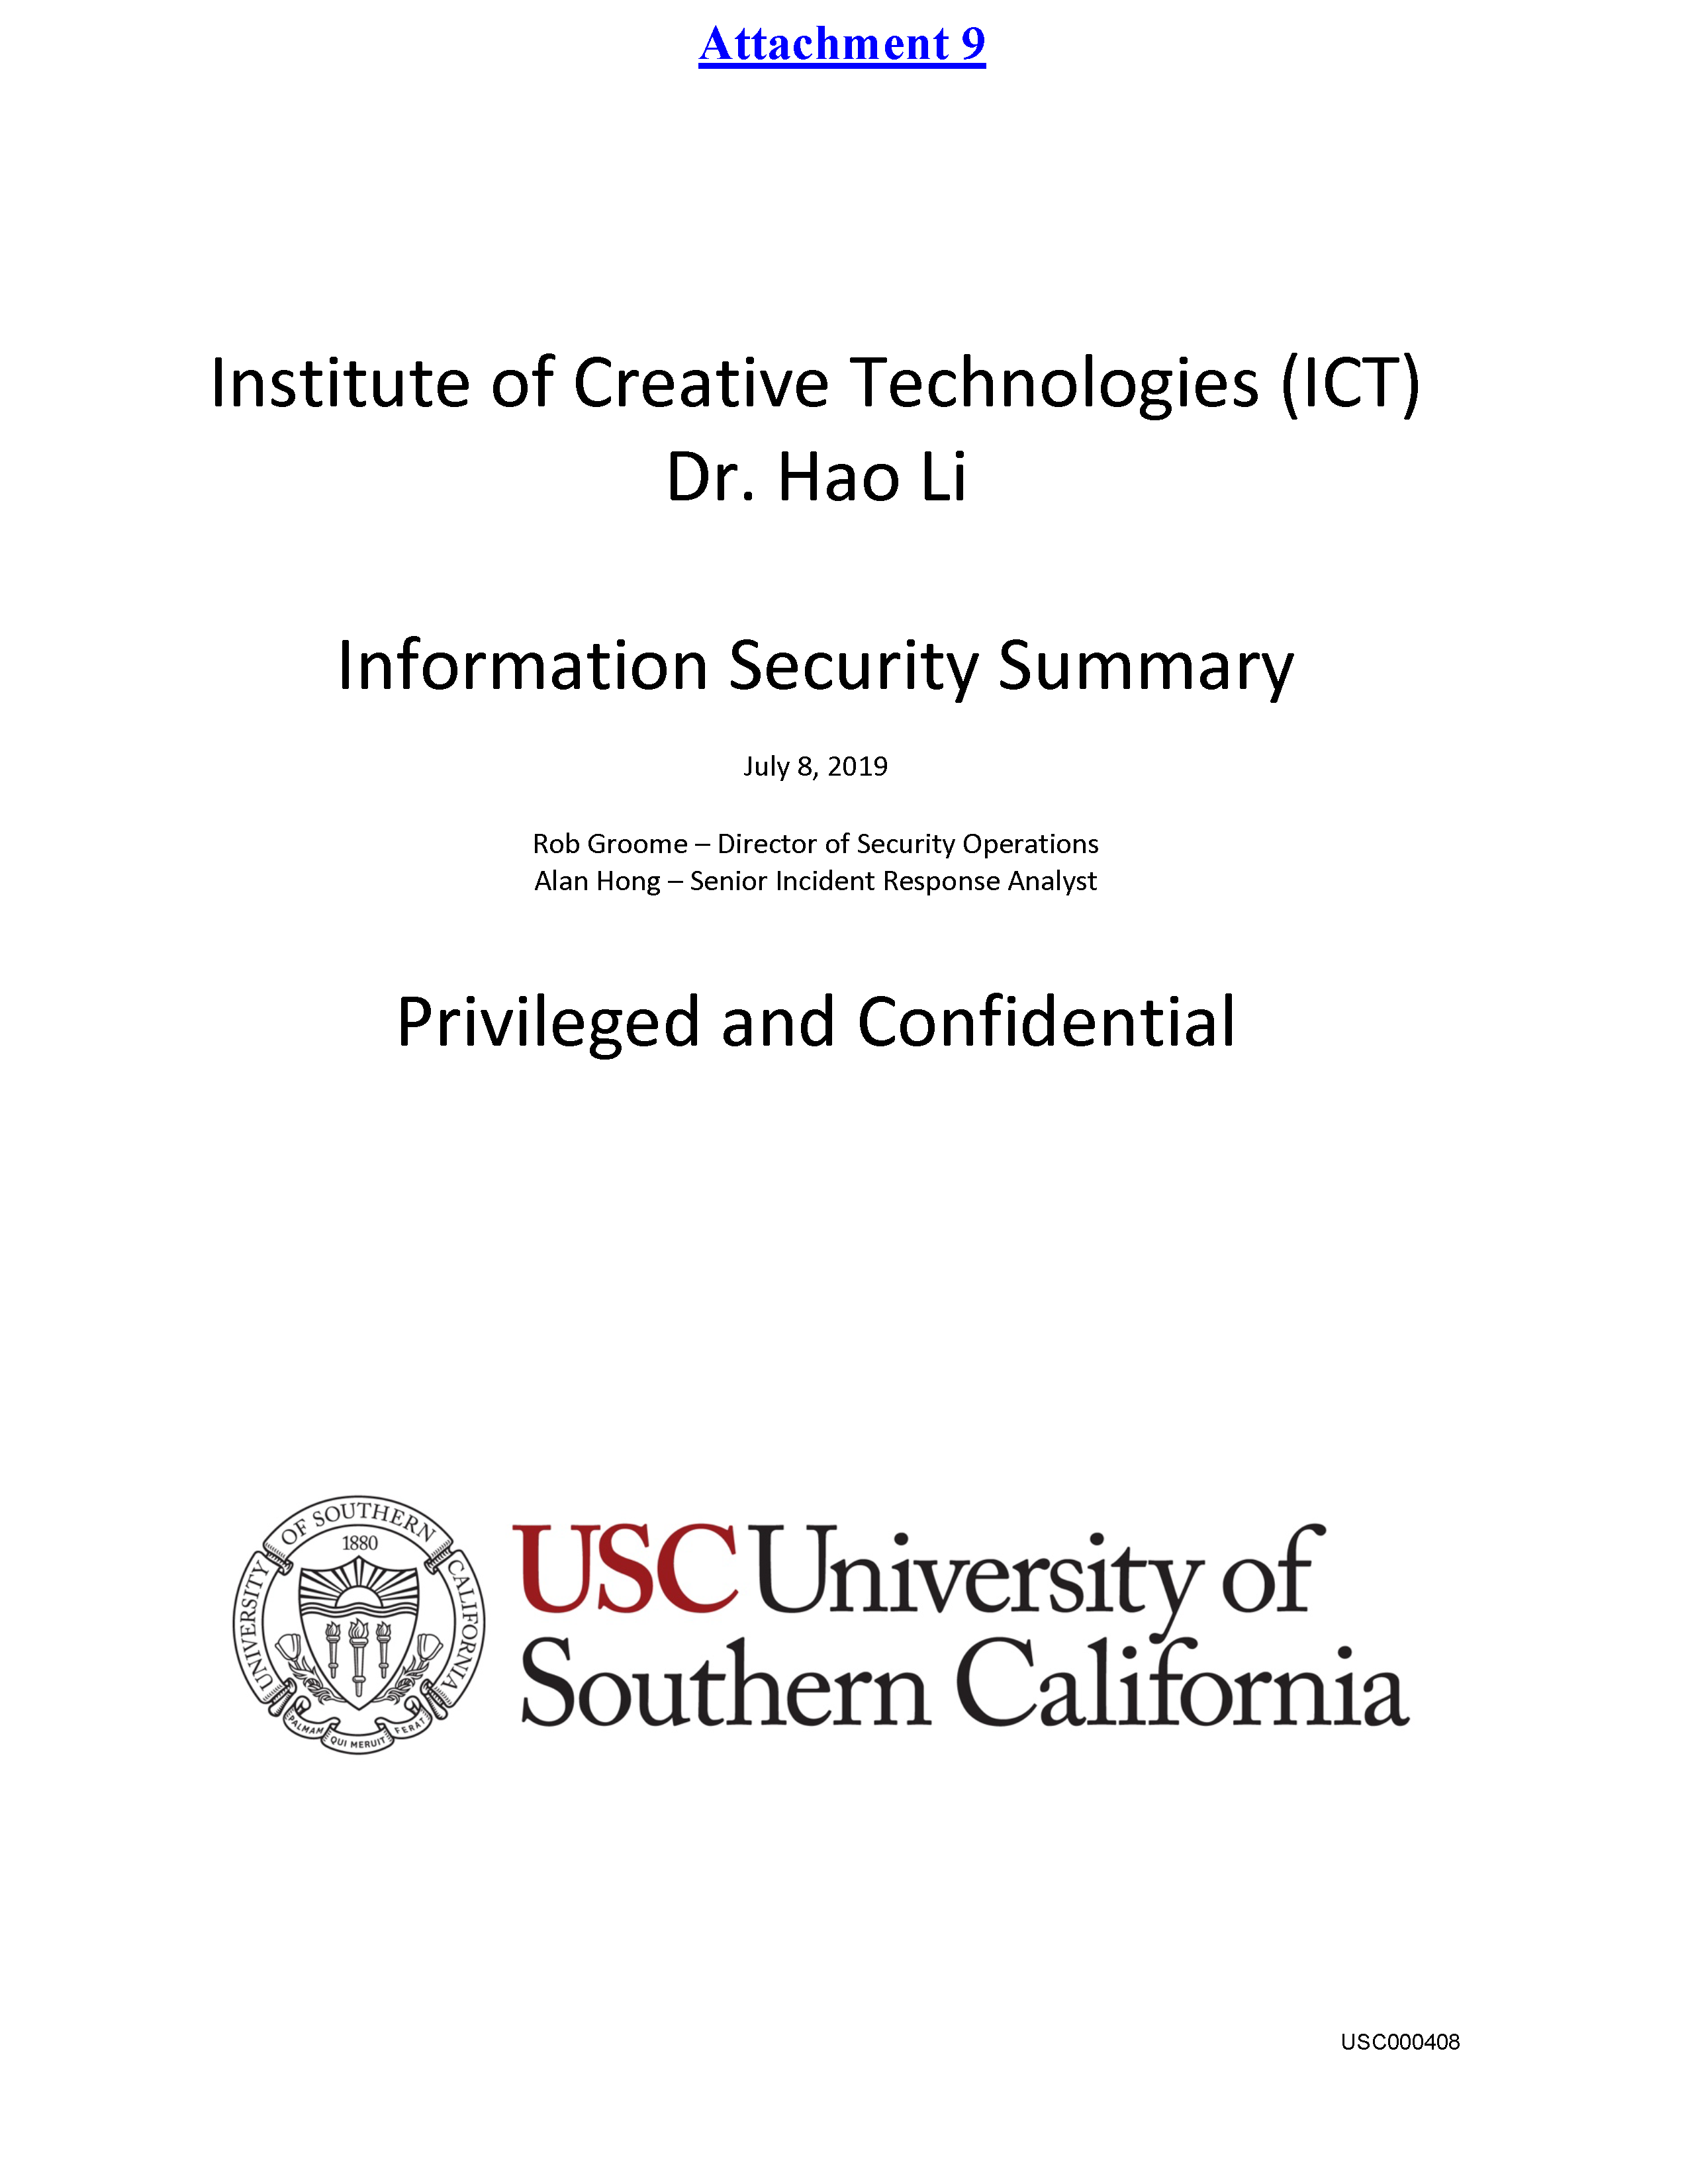 USC's Investigation Report re Hao Li's and Pinscreen's Scientific Misconduct at ACM SIGGRAPH RTL 2017 [Summary] Page 56